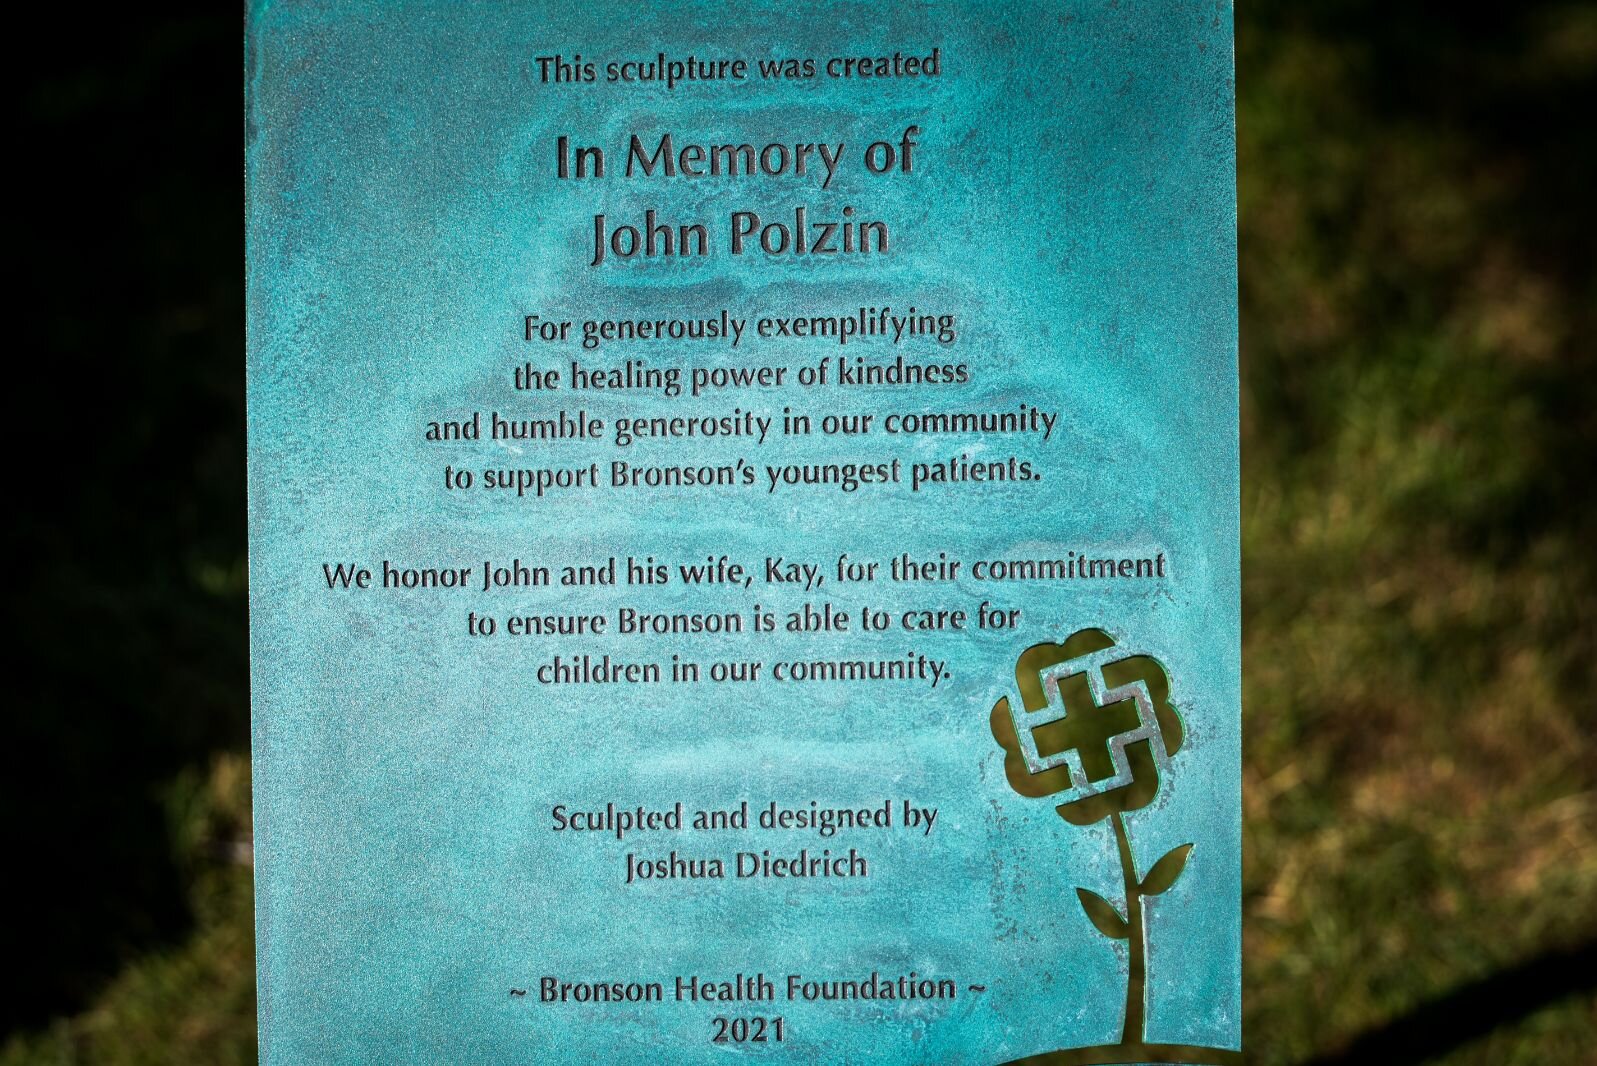 This sculpture was created in memory of John Polzin for his commitment to  Bronson Methodist Children’s Hospital.